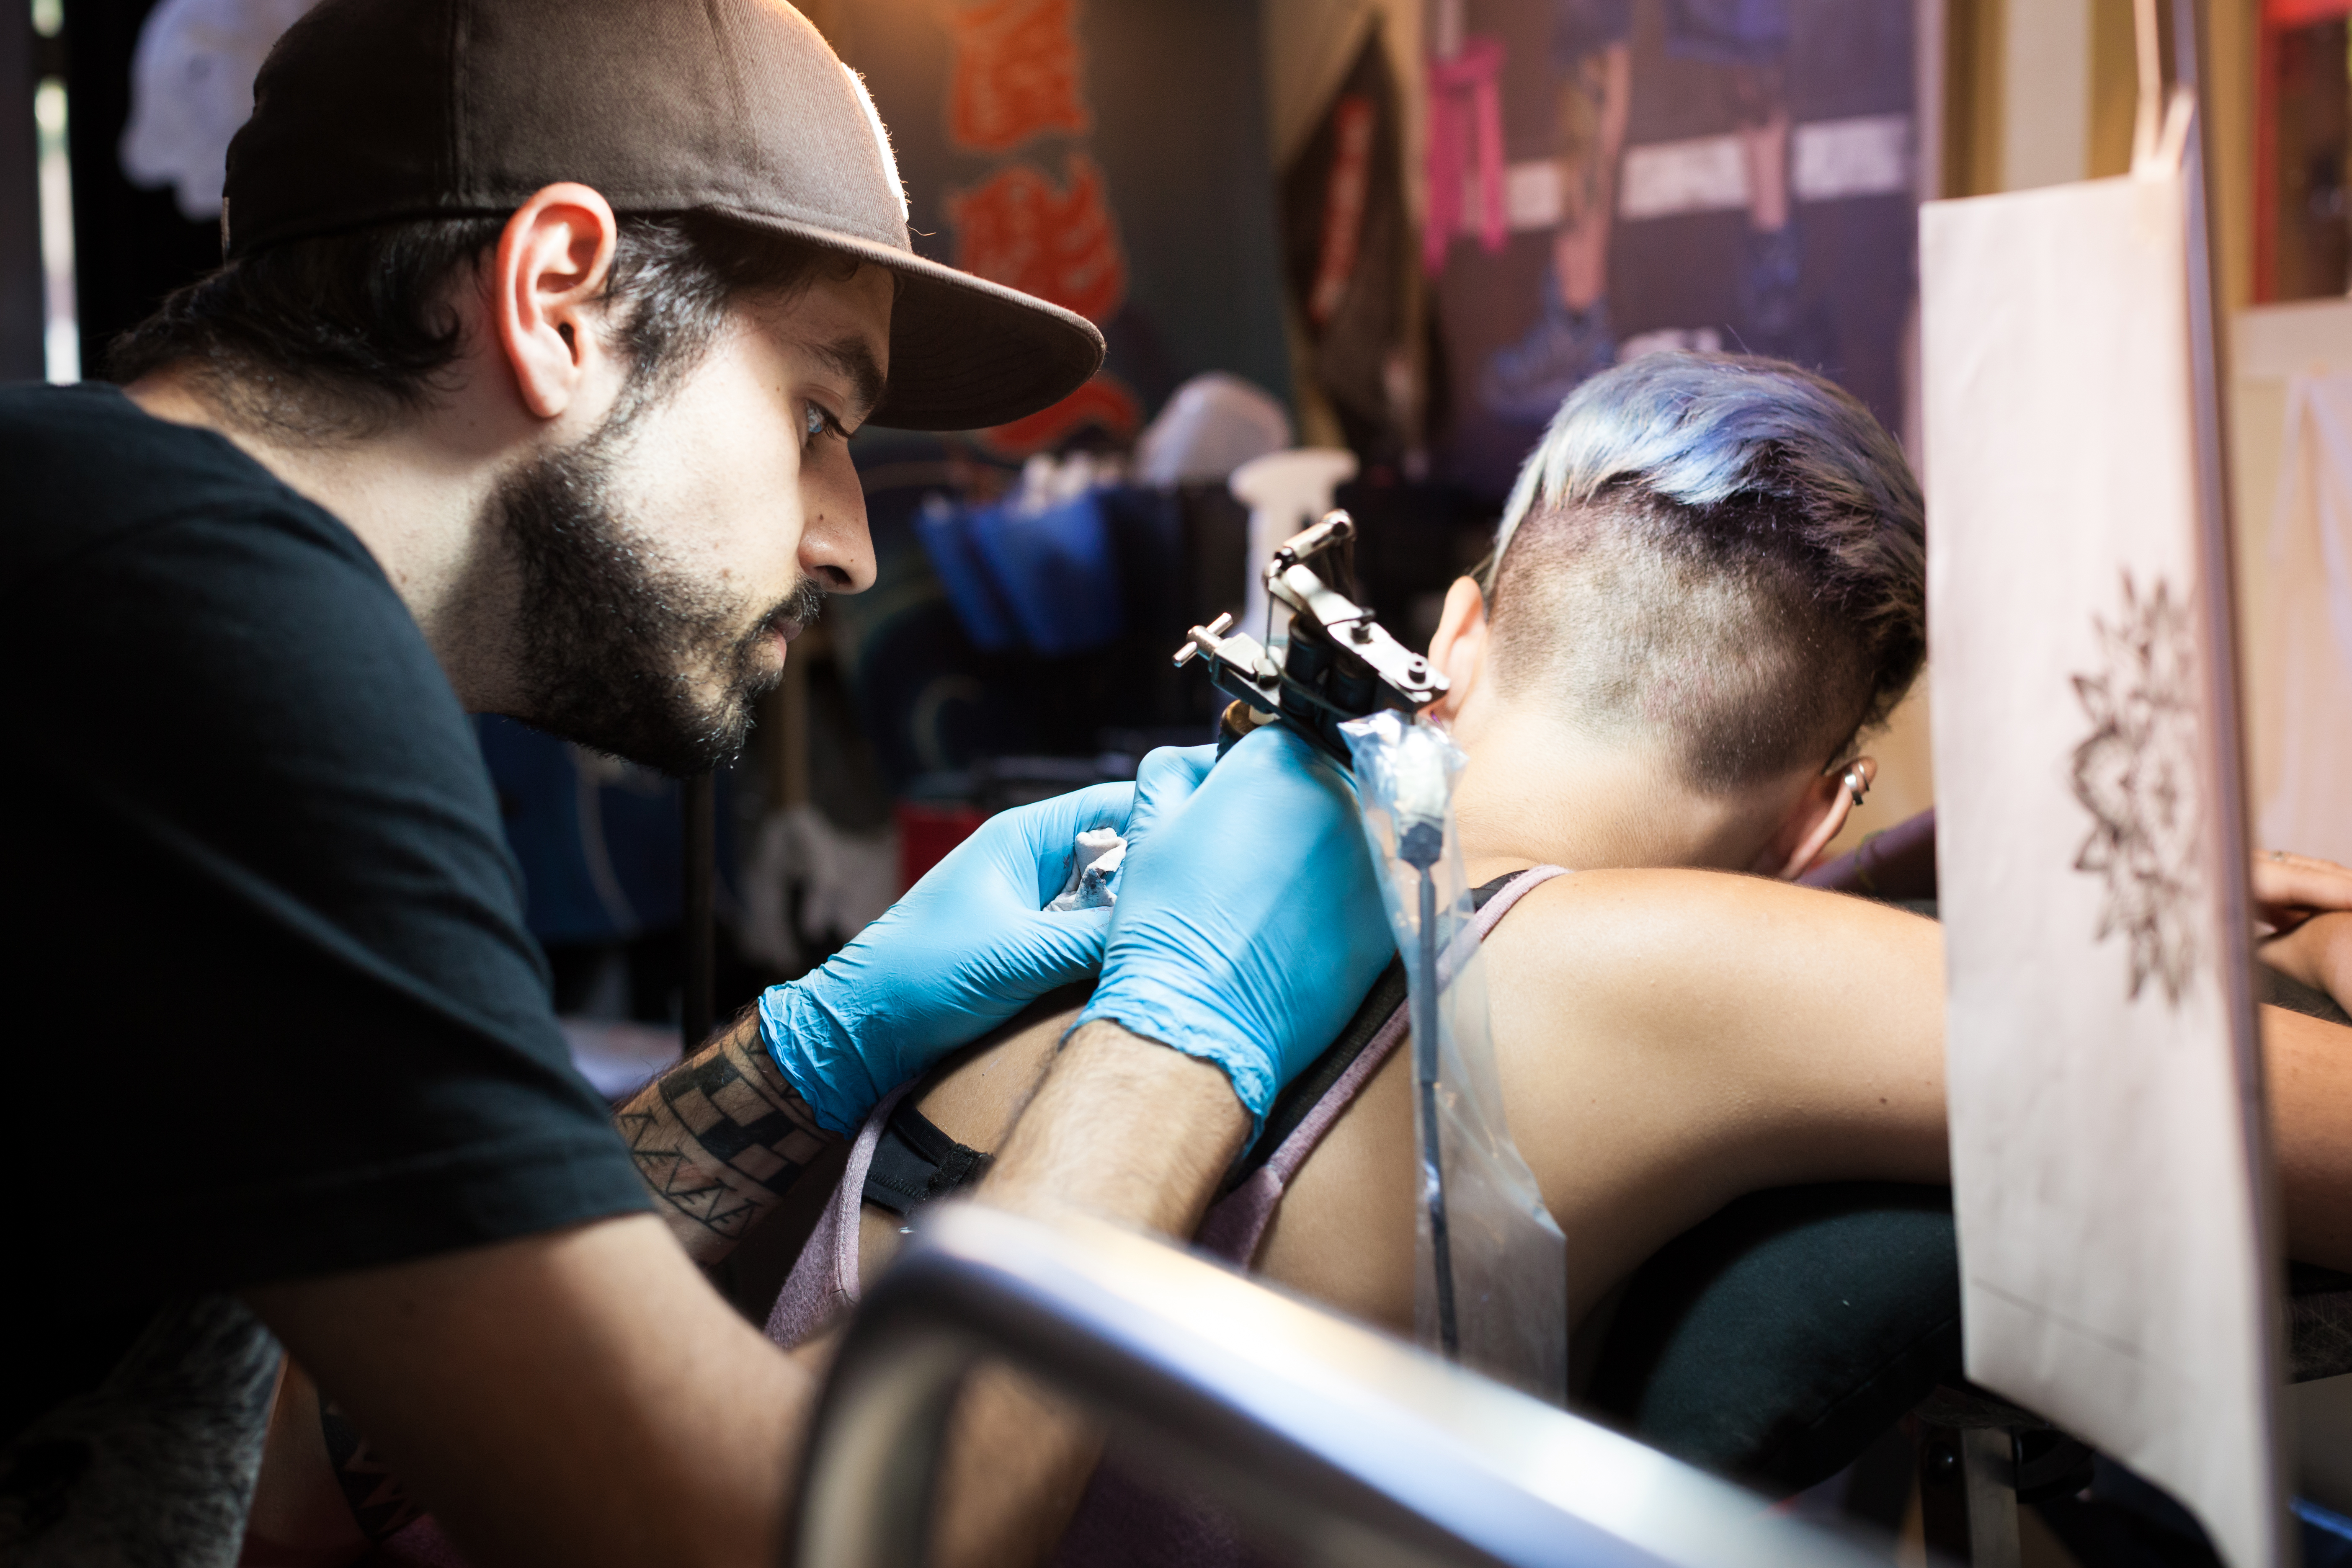 Friday the 13th Tattoo Deals Where to Find Cheap Tattoos Near Me   Thrillist